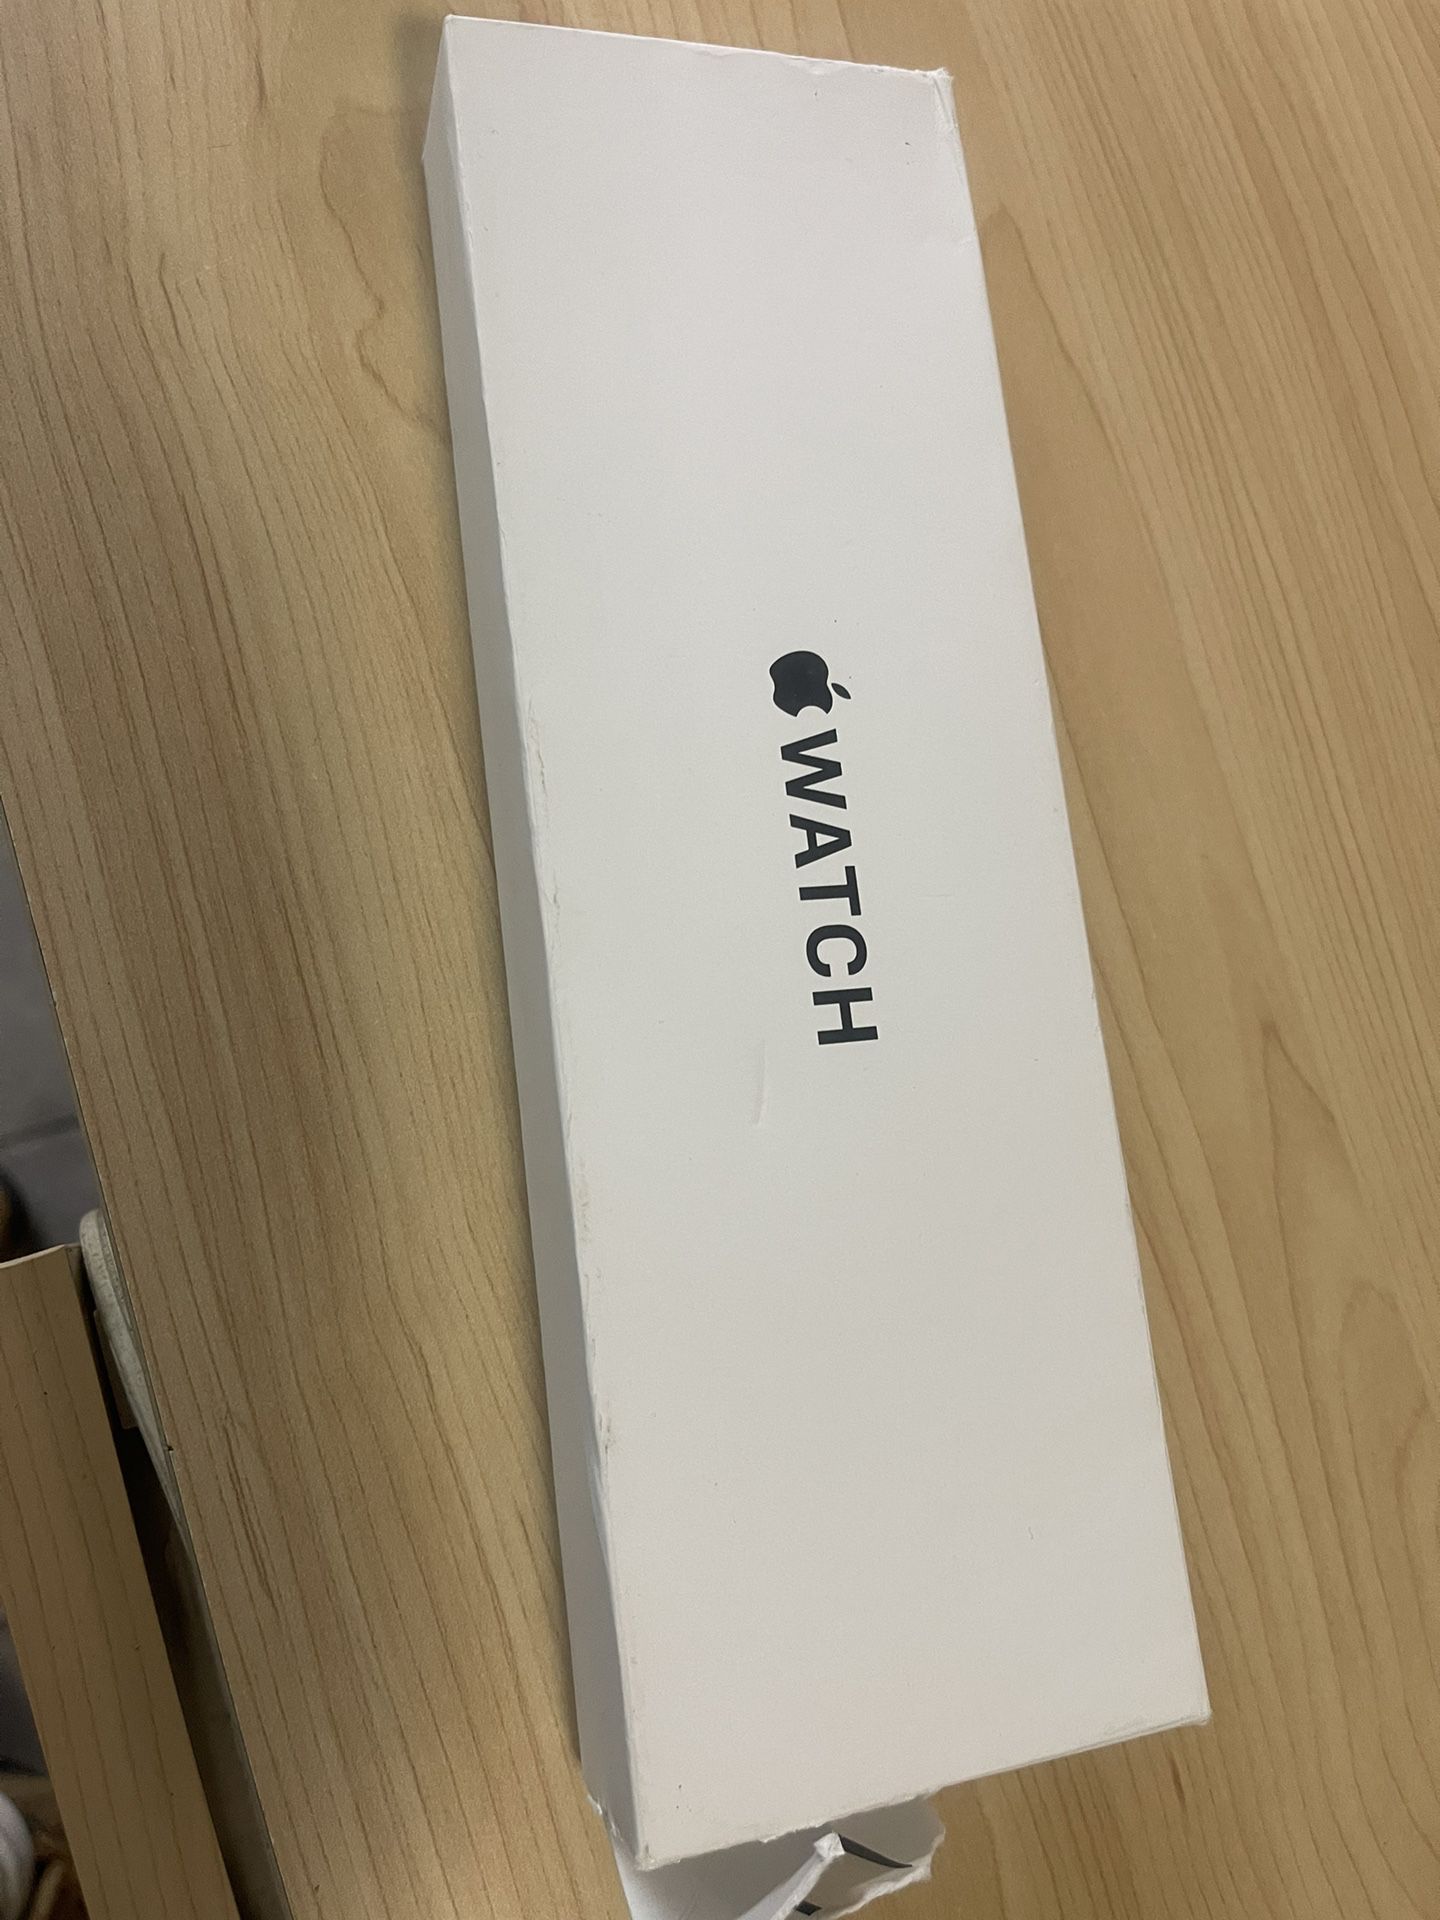 Apple Watch SE (Gen 2) 44mm Midnight Aluminum GPS + Cellular- Brand New Sealed . It’s Unlocked. The outer box is bit damaged but it’s sealed Brand New